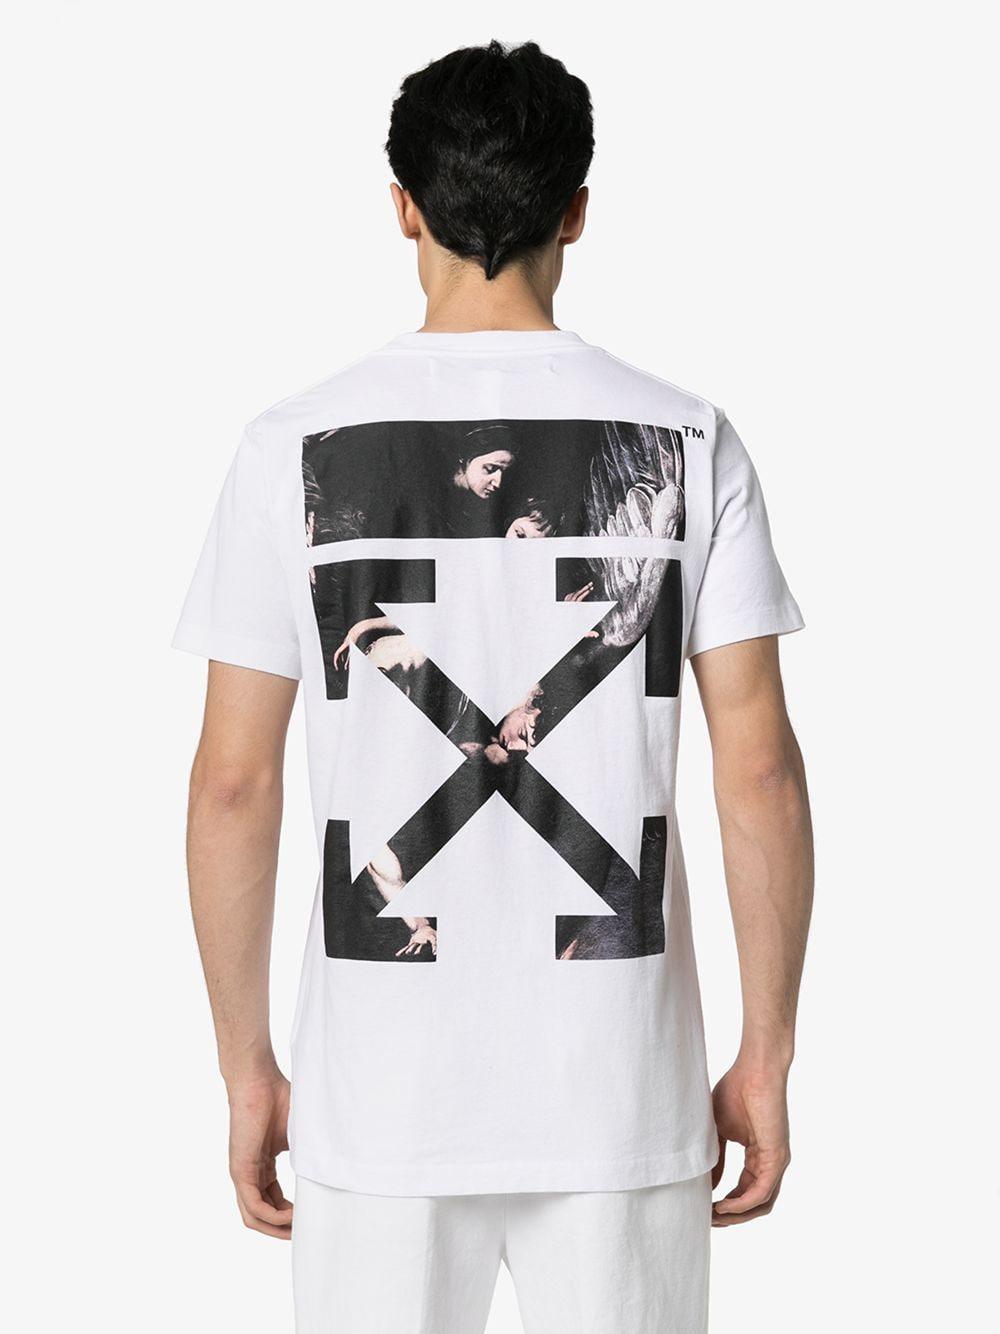 Save 64% Off-White c/o Virgil Abloh Cotton Off Mens Clothing T-shirts Short sleeve t-shirts Caravaggio Arrows T-shirt in White for Men 